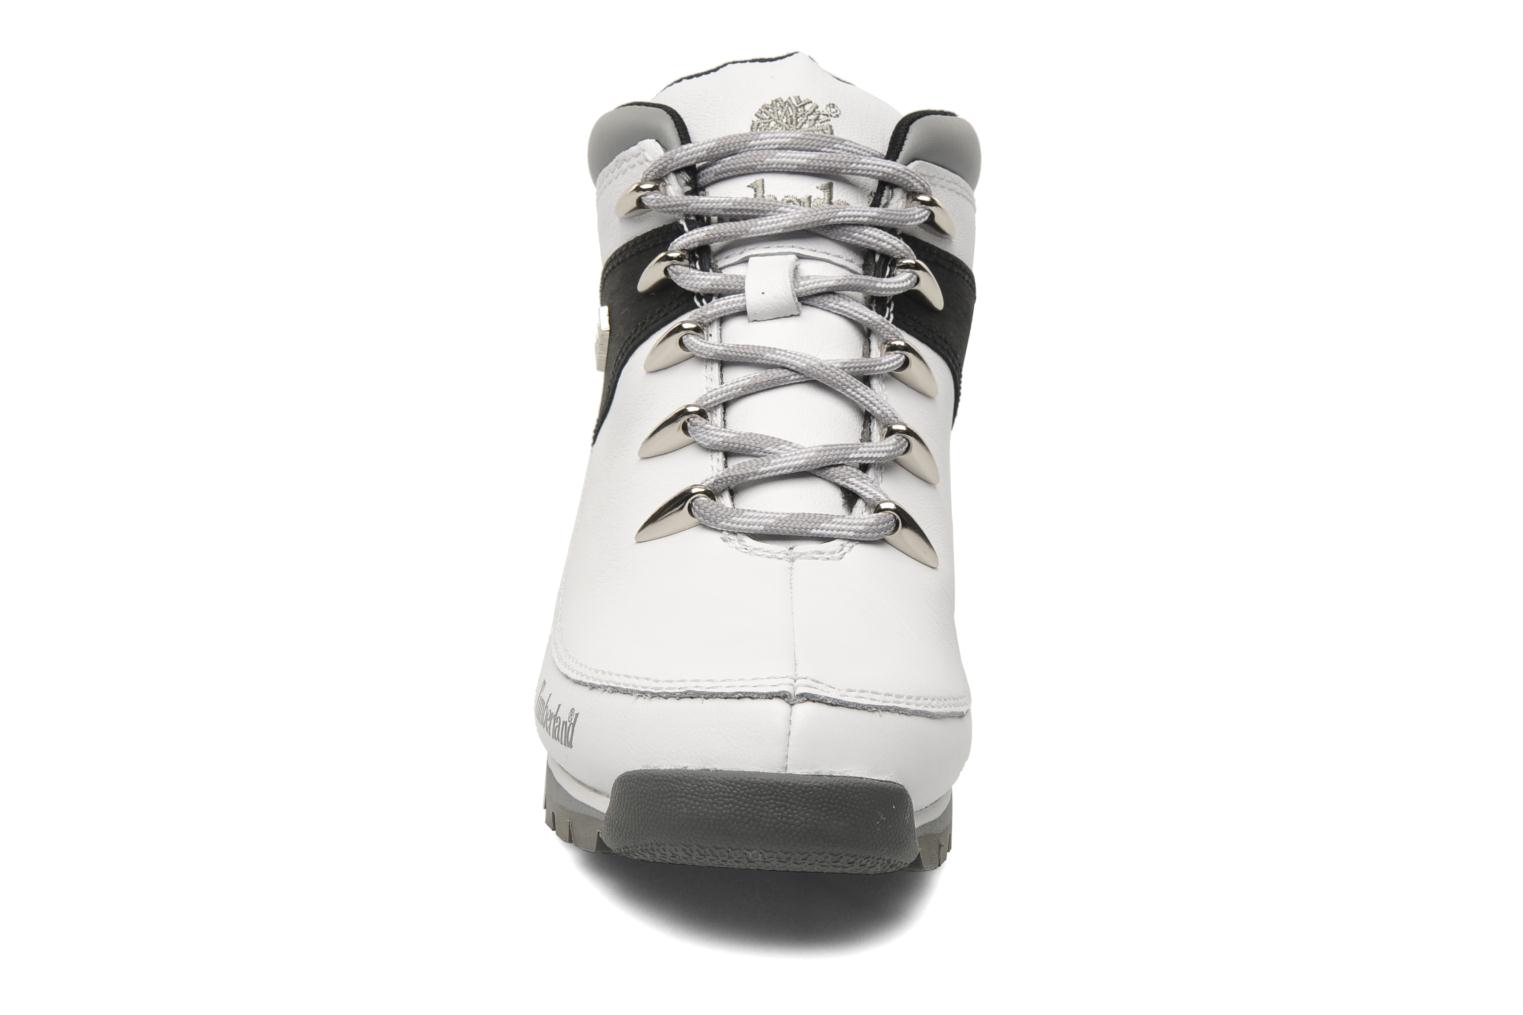 Timberland Euro Sprint Hiker Lace-up shoes in White at Sarenza.co.uk ...